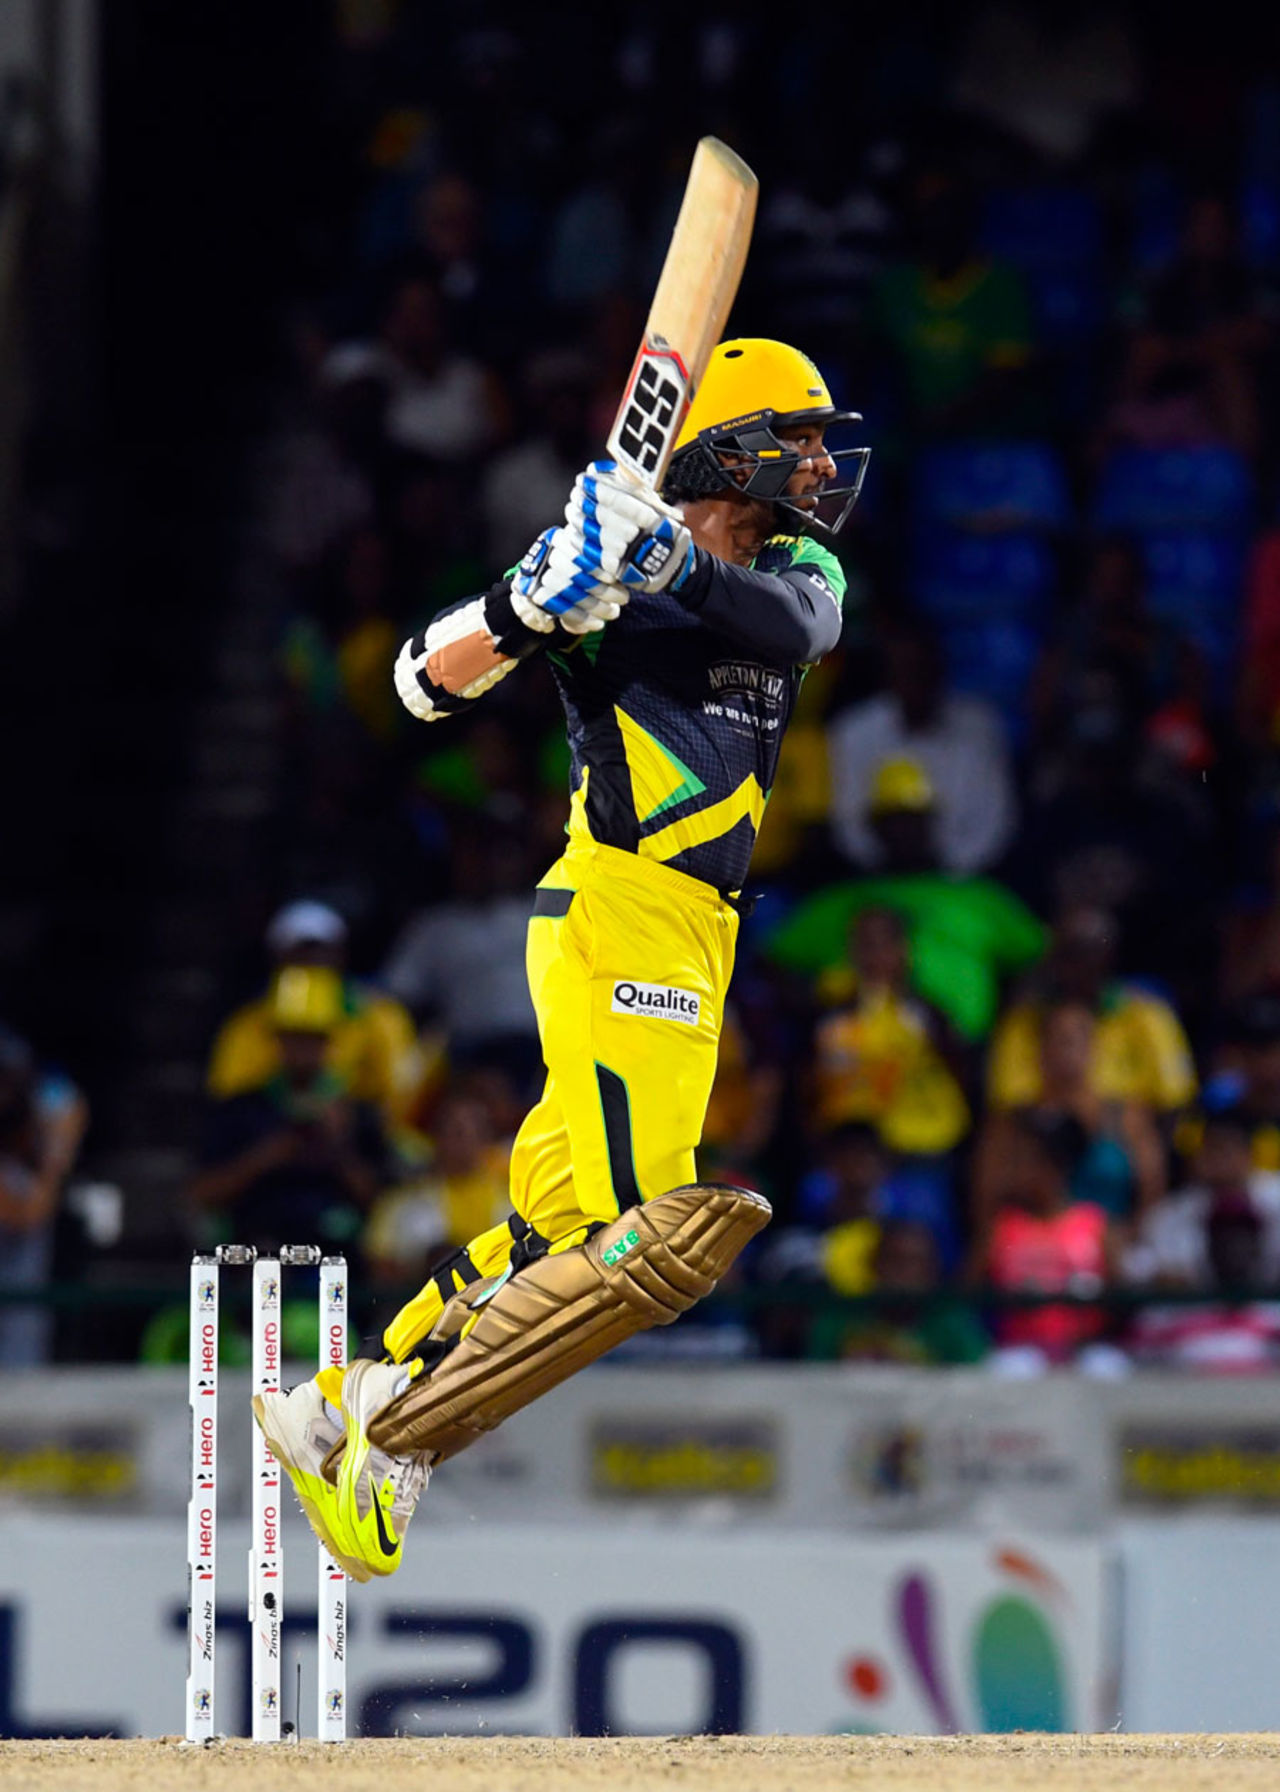 Kumar Sangakkara leaps to send one whizzing through the off side, Guyana Amazon Warriors v Jamaica Tallawahs, CPL 2016, 1st playoff, St Kitts, August 3, 2016